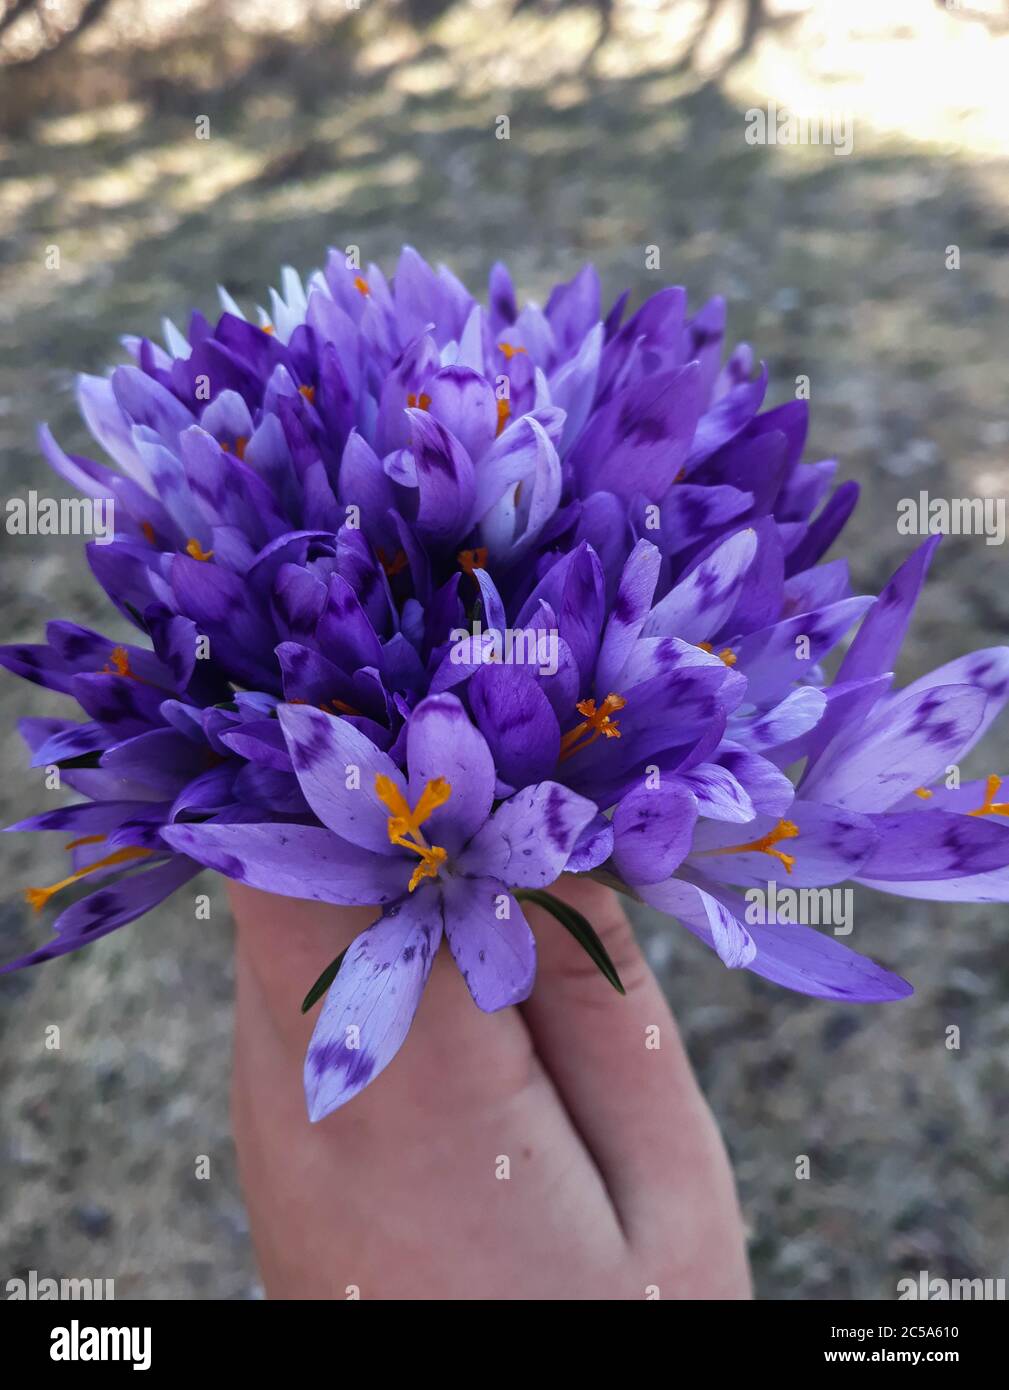 bouquet of purple wild violets in hand on a blurred background Stock Photo